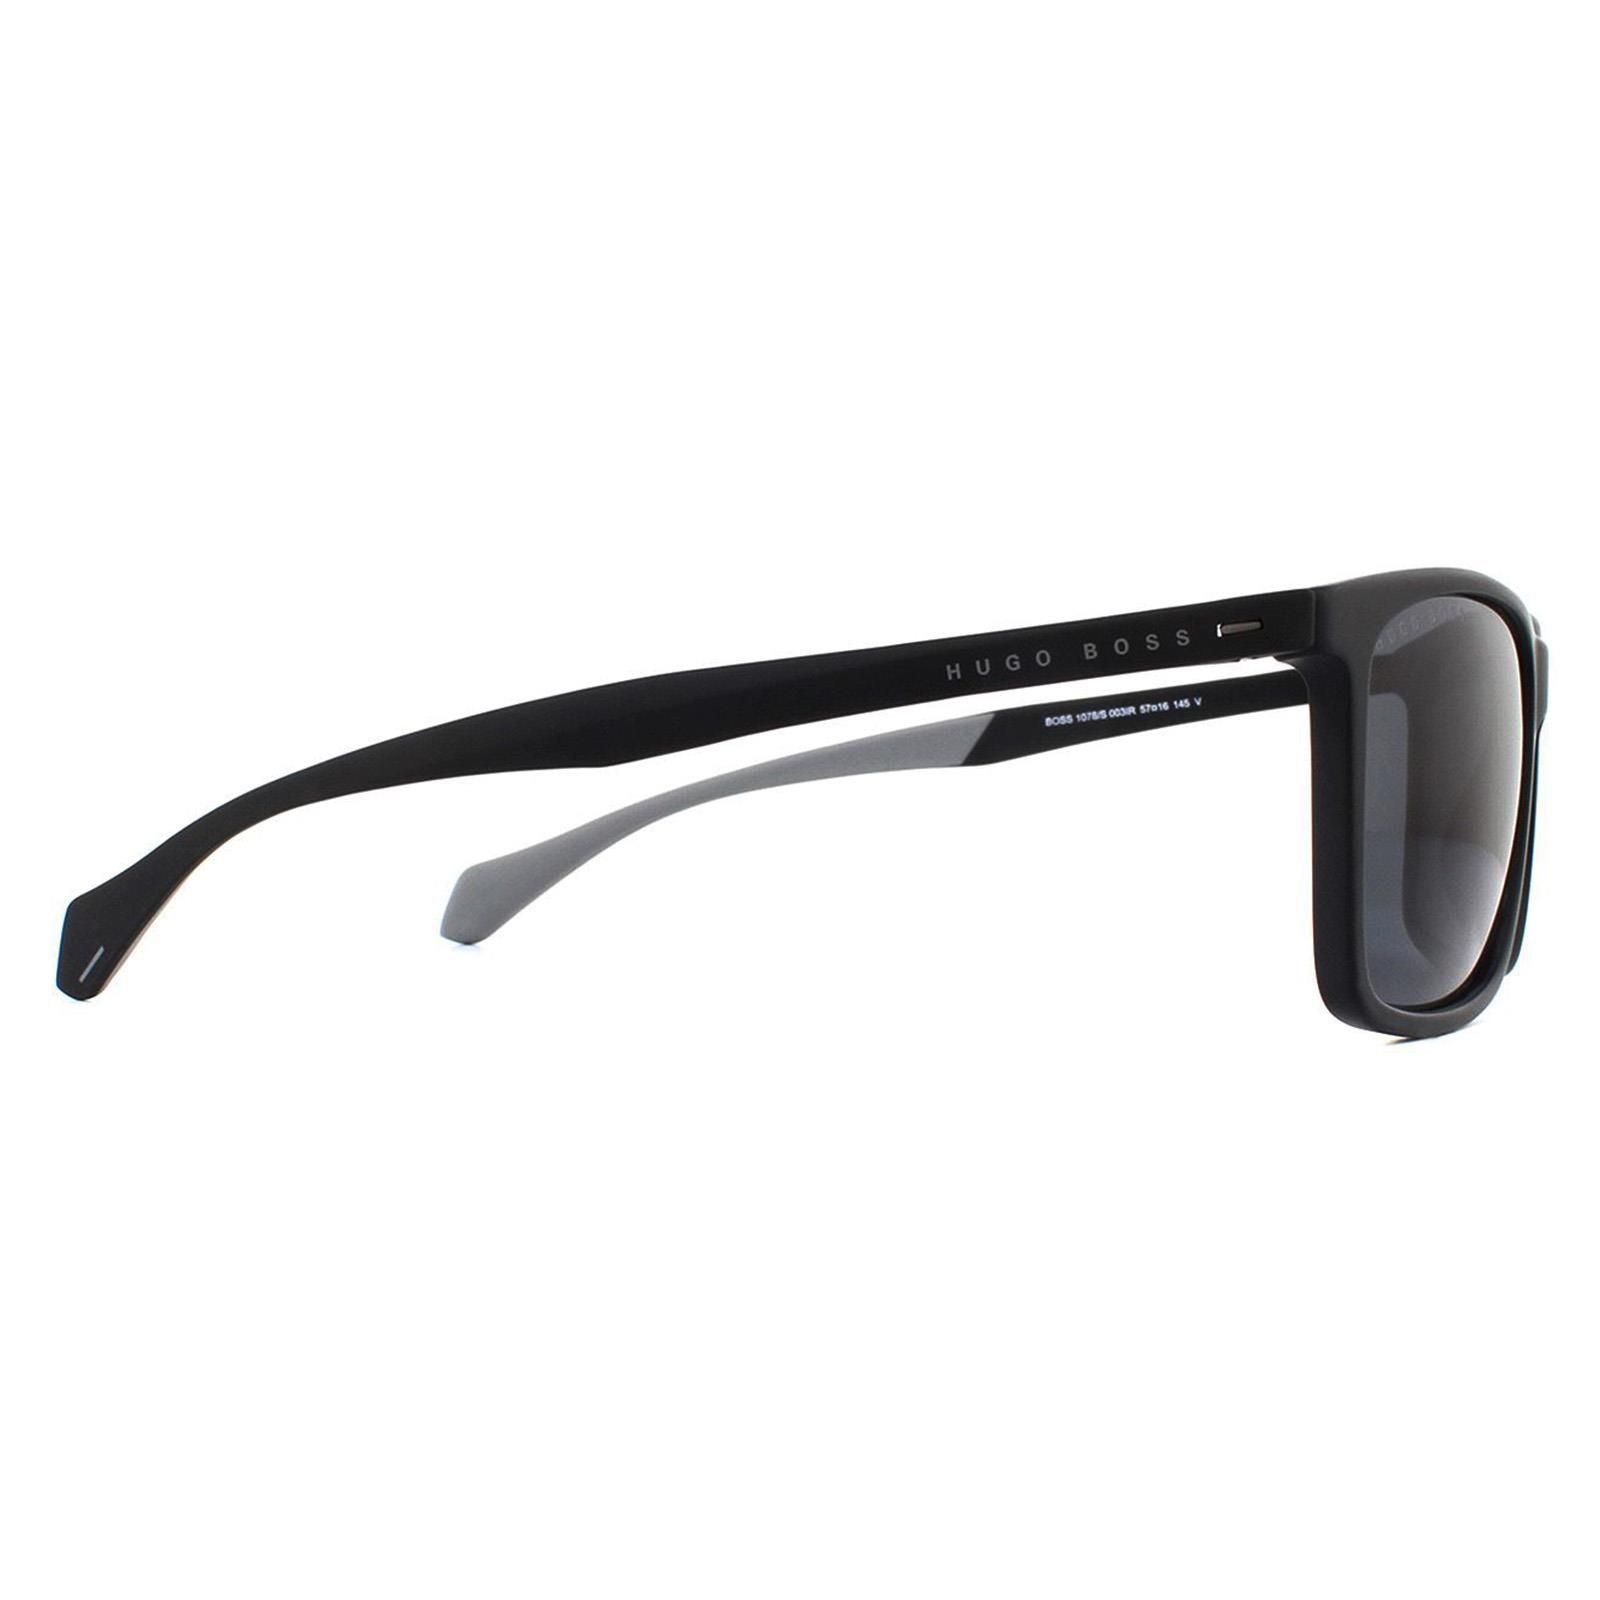 Hugo Boss Sunglasses BOSS 1078/S 003 IR Matte Black Grey are a sleek rectangular style for men. Made from lightweight acetate, the frame is very comfortable to wear and features the Hugo Boss logo on each temple.